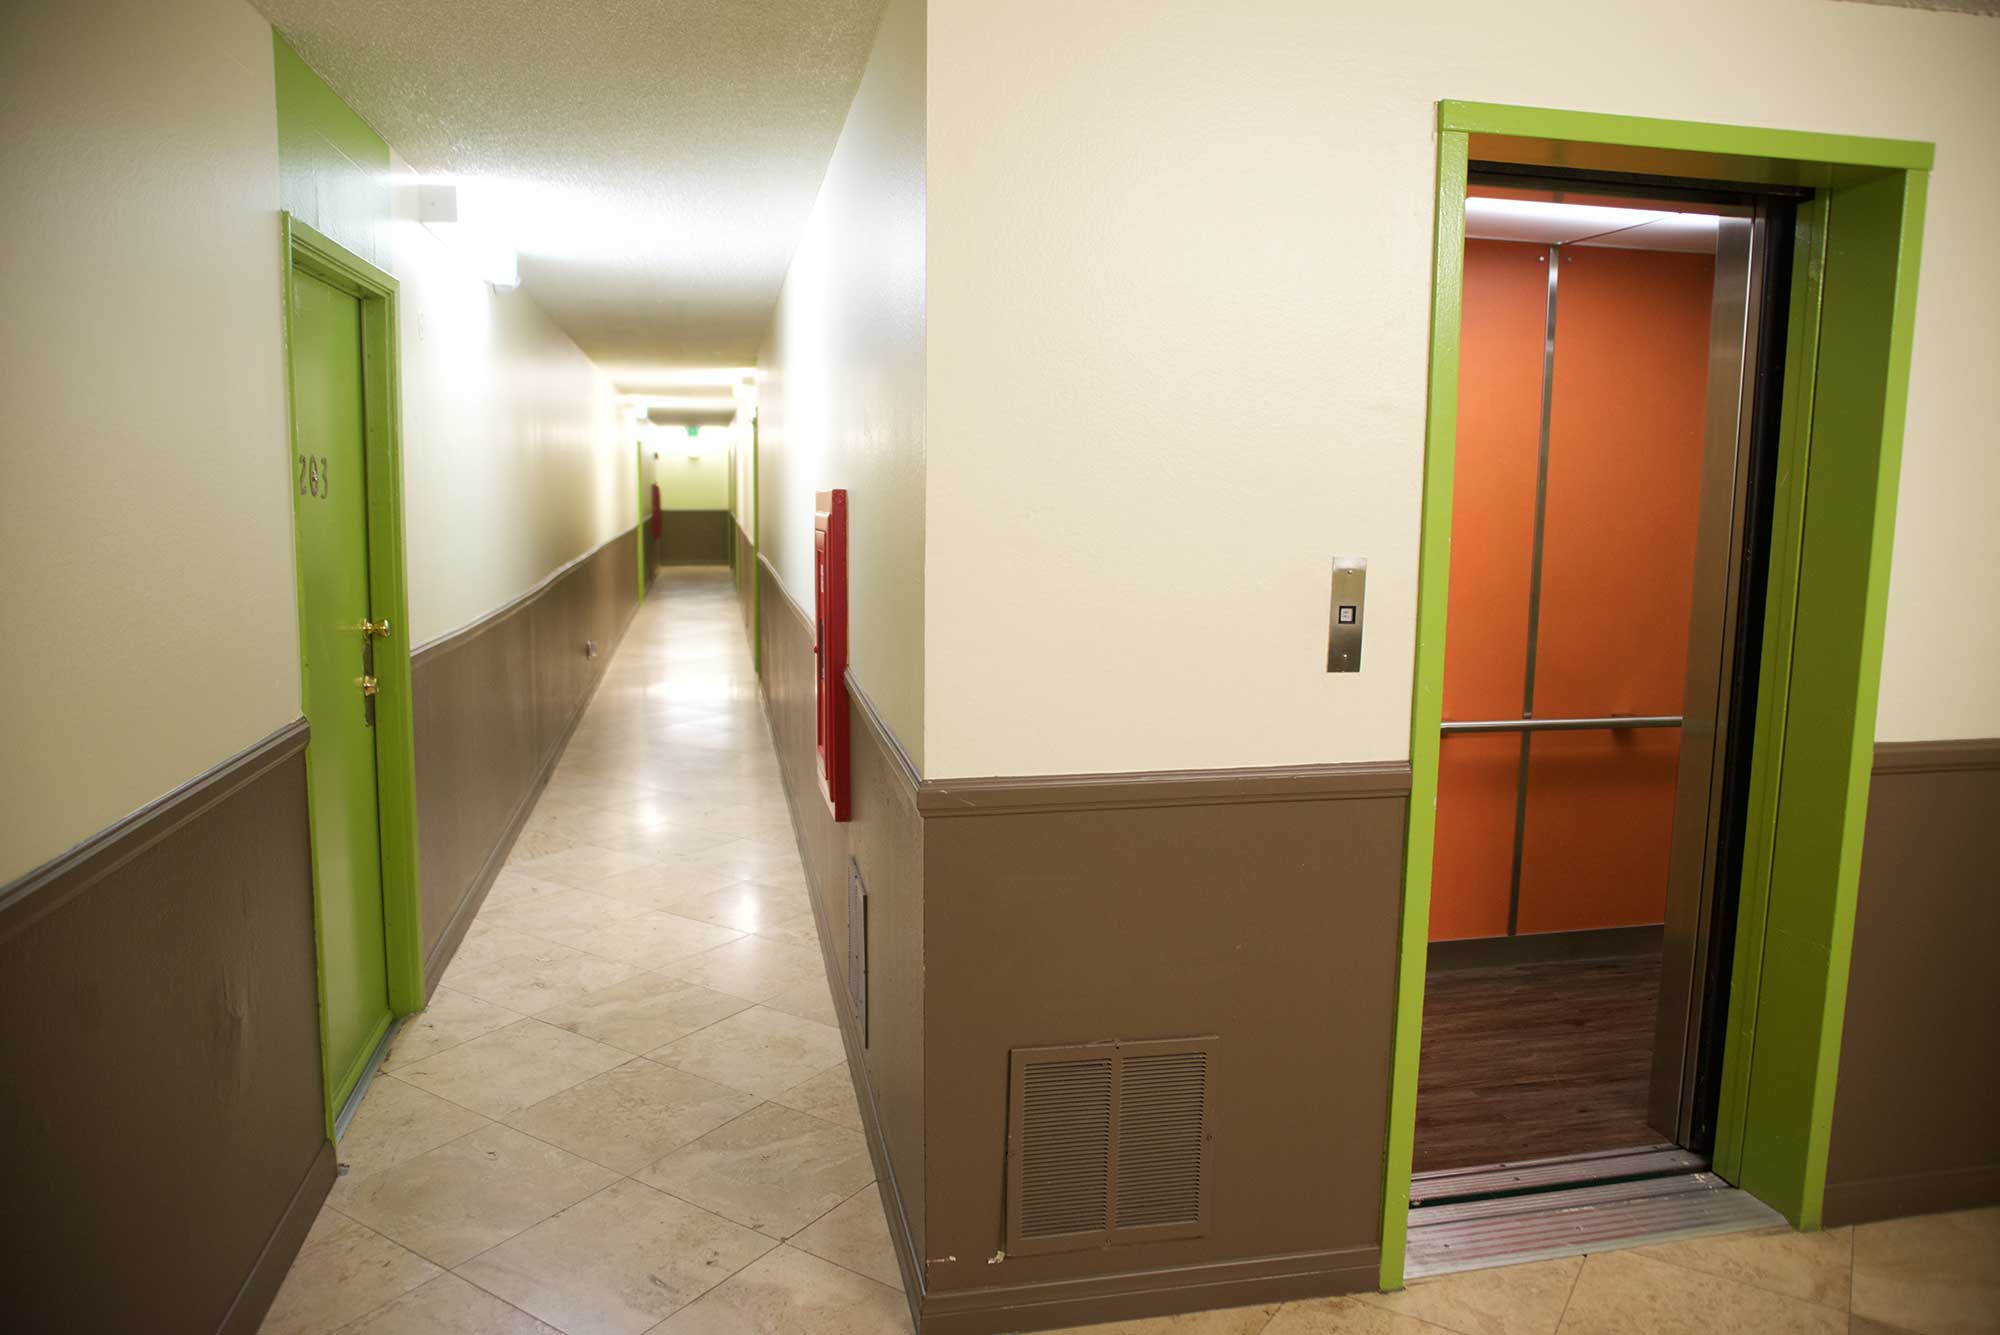 Lime on 4th Aparment complex hallway